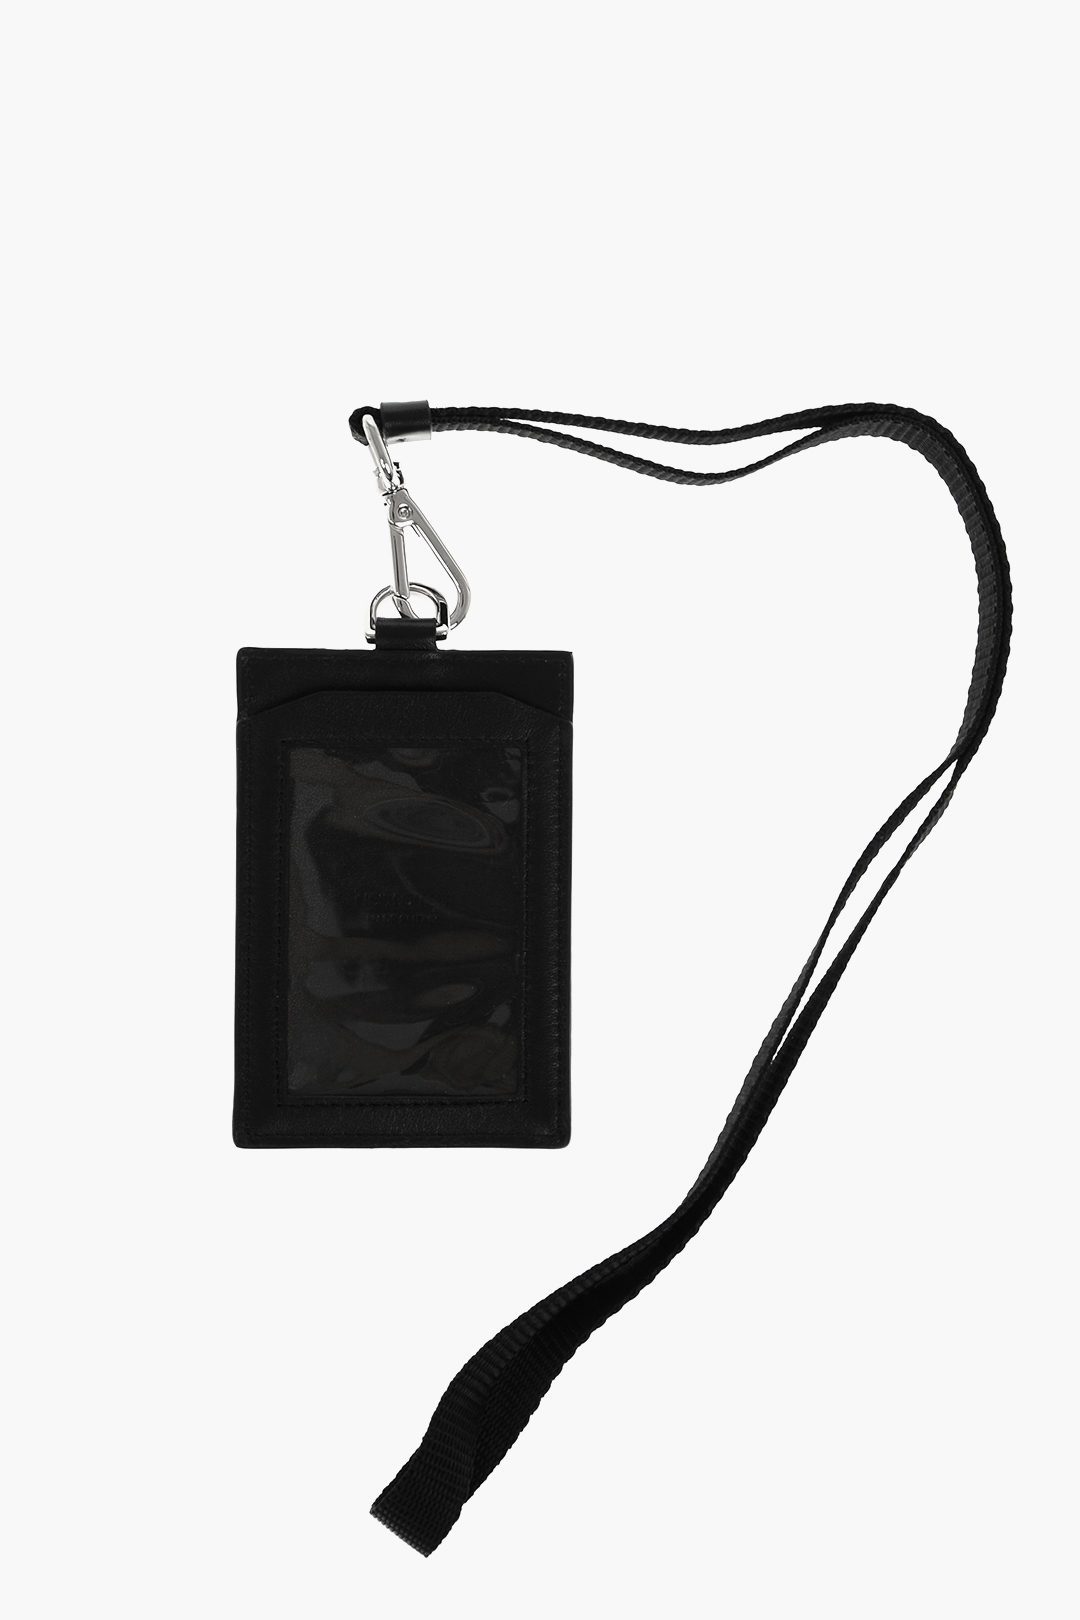 Neil Barrett Porta Badge THE OTHER HAND in Pelle unisex uomo donna -  Glamood Outlet